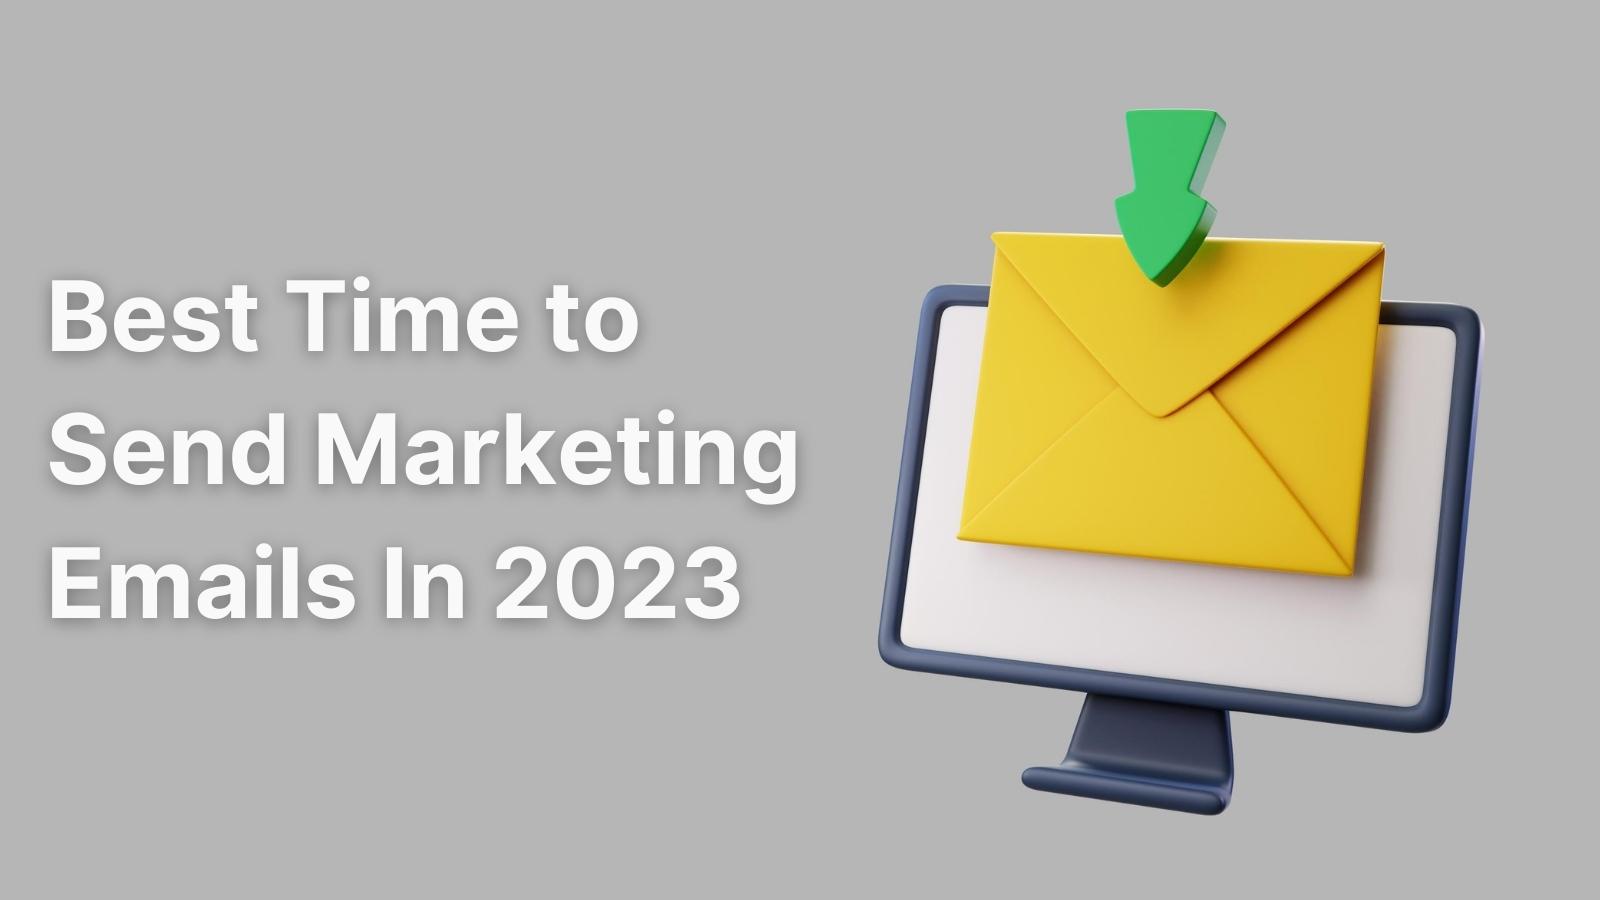 Best Time to Send Marketing Emails In 2023